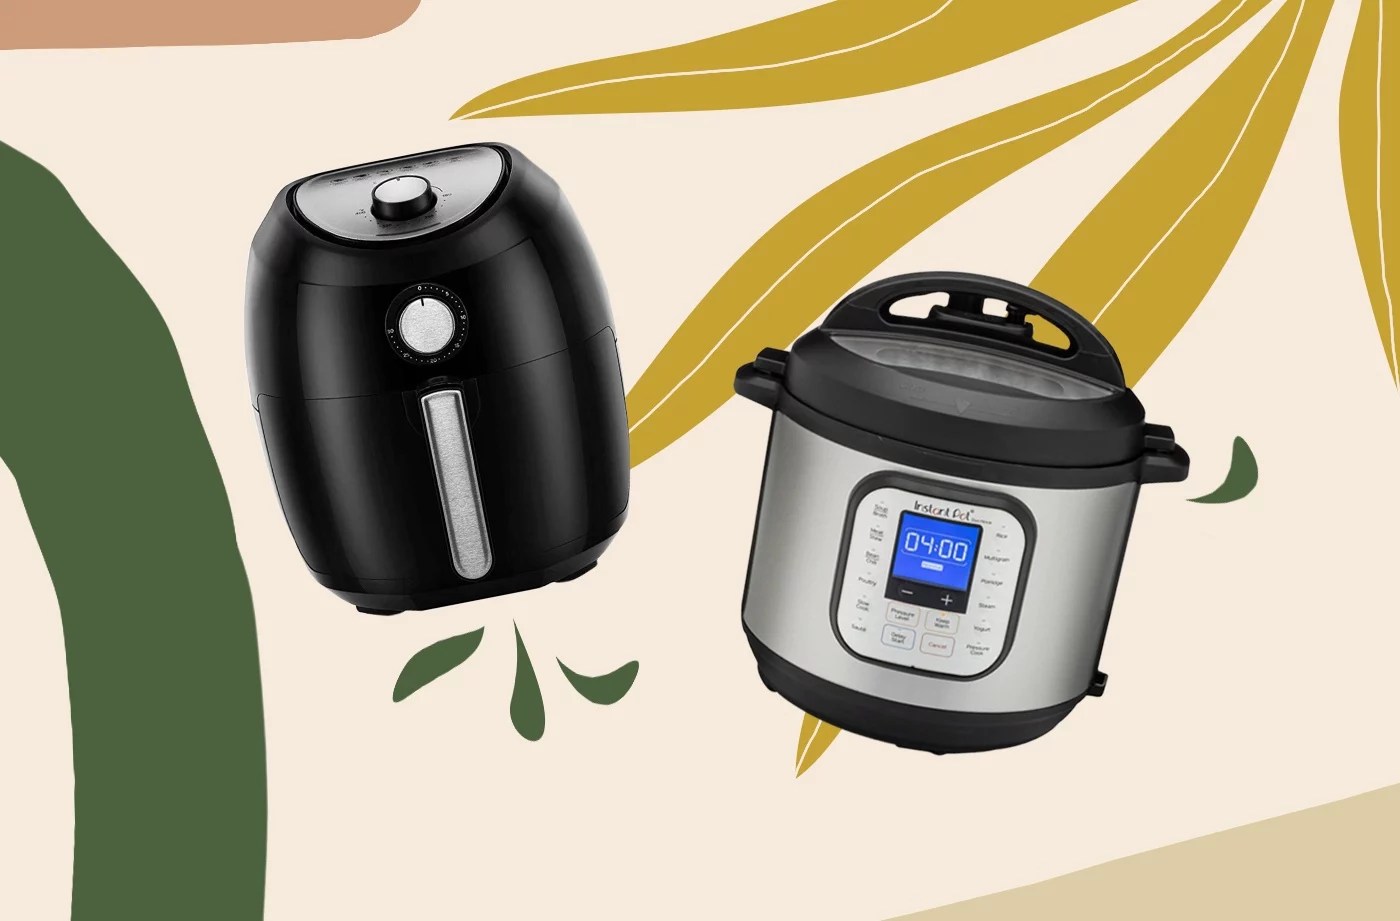 Instant Pot Thanksgiving: How to use your pressure cooker - Reviewed